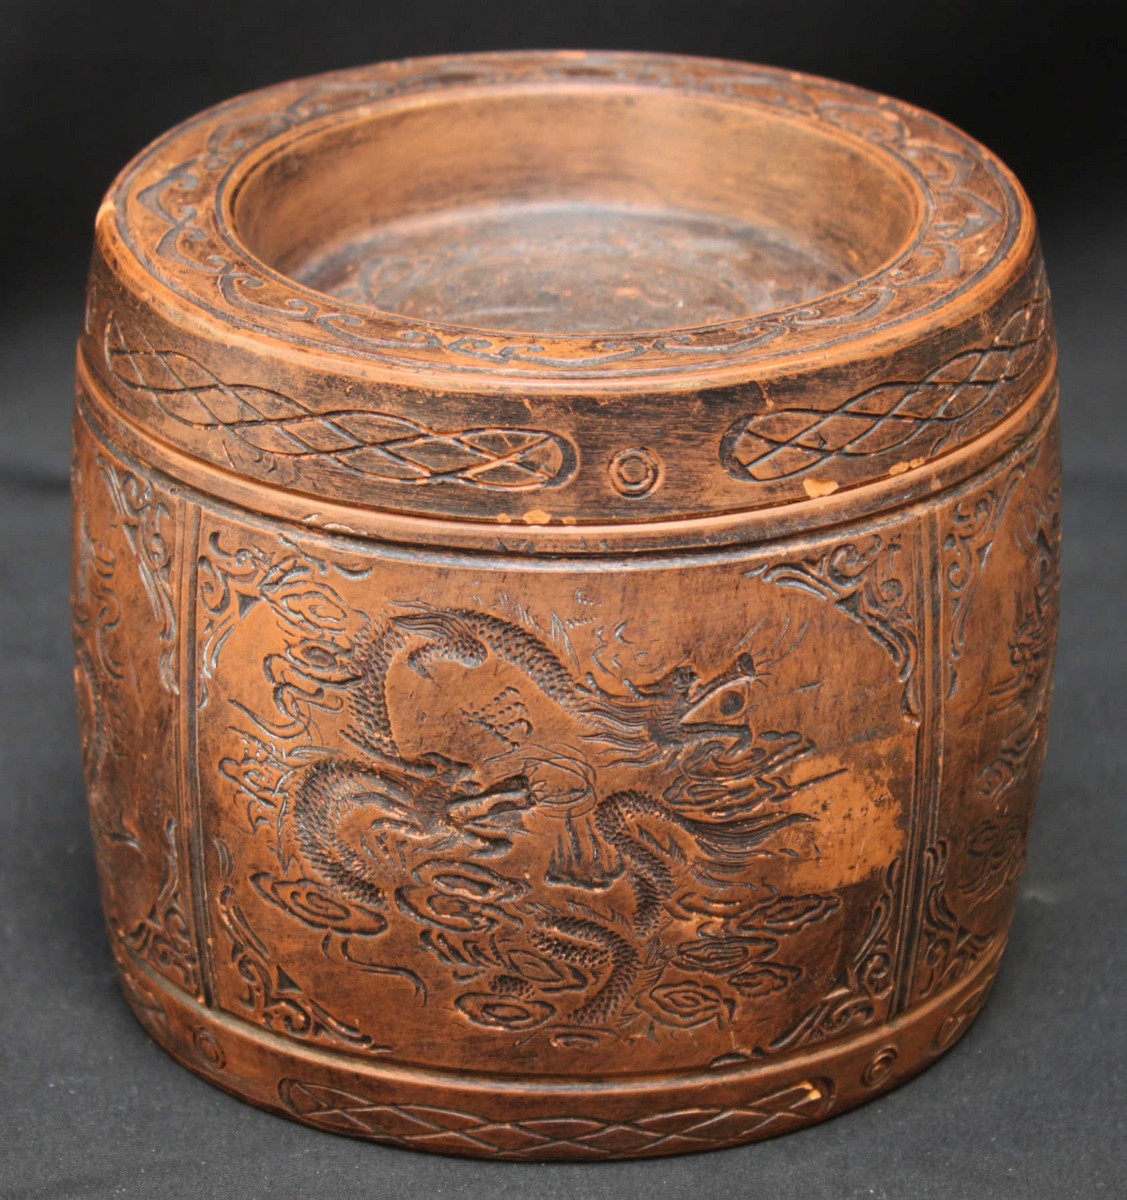 A Chinese Yixing type pottery cricket box and cover of cylindrical form, the cover and four-panelled